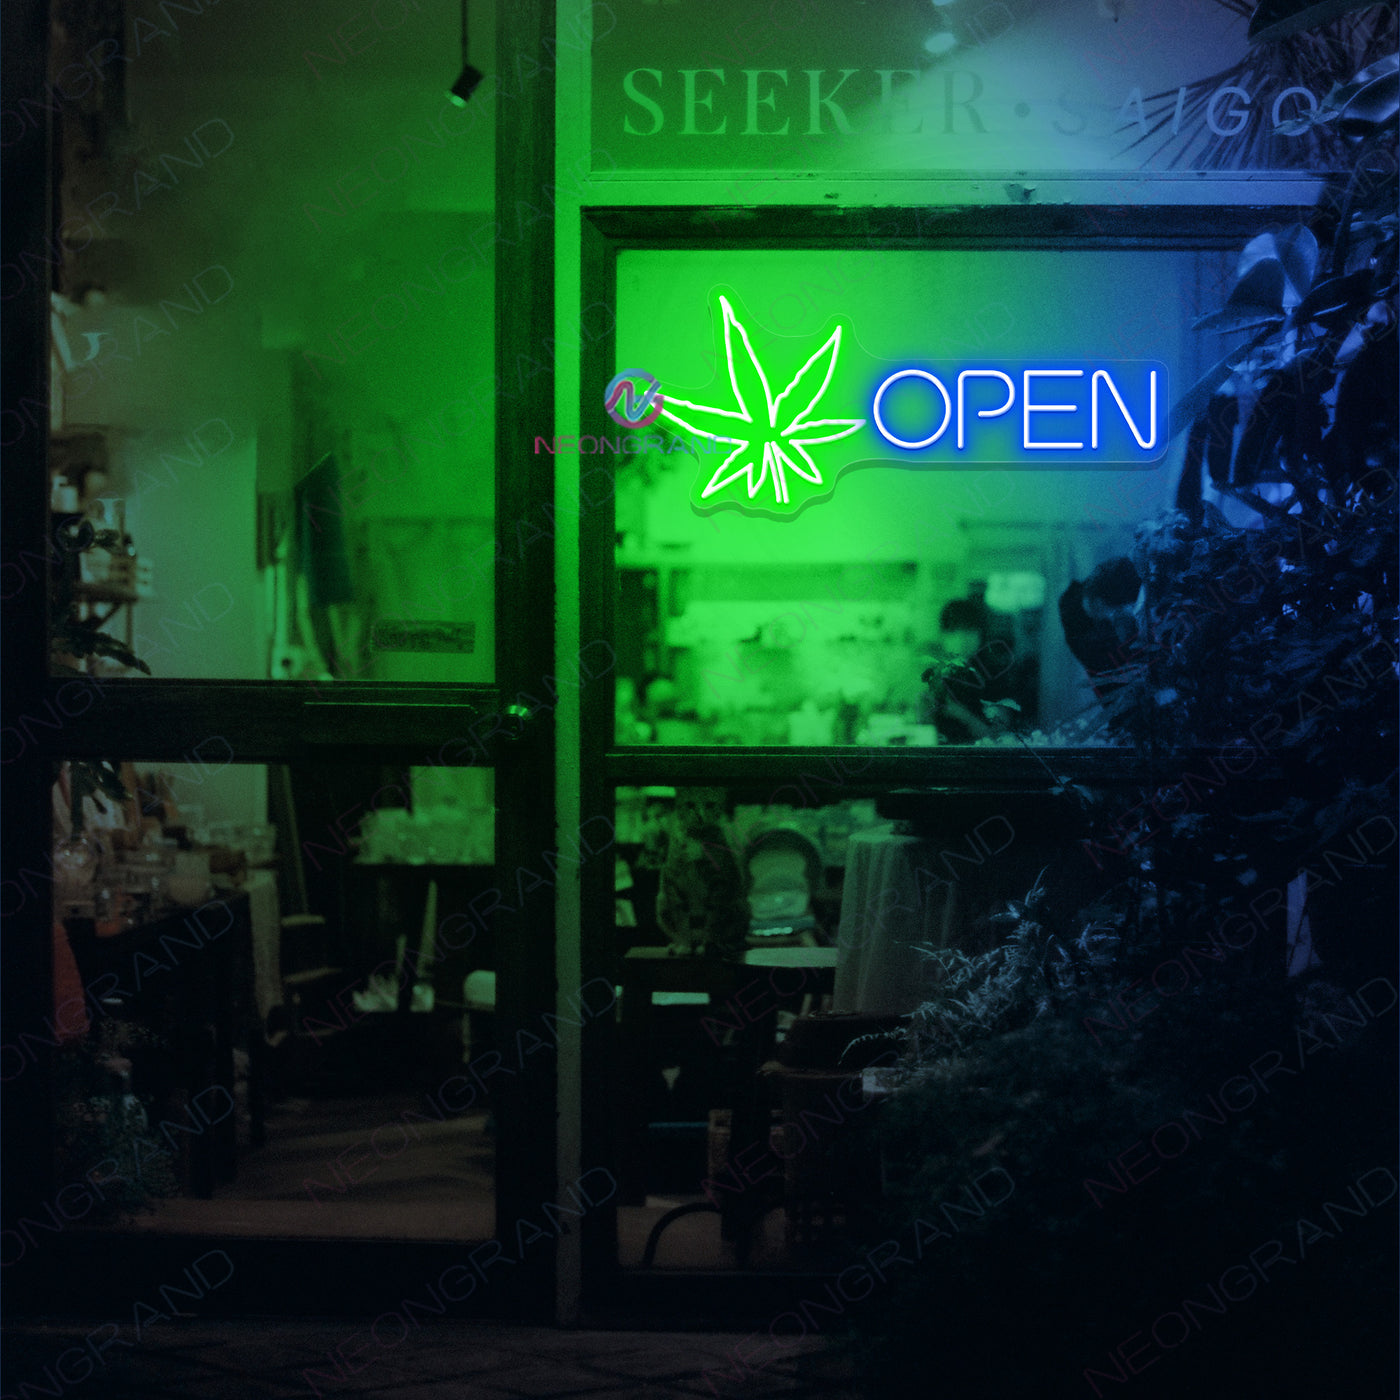 Open Weed Neon Sign Cannabis Led Light blue